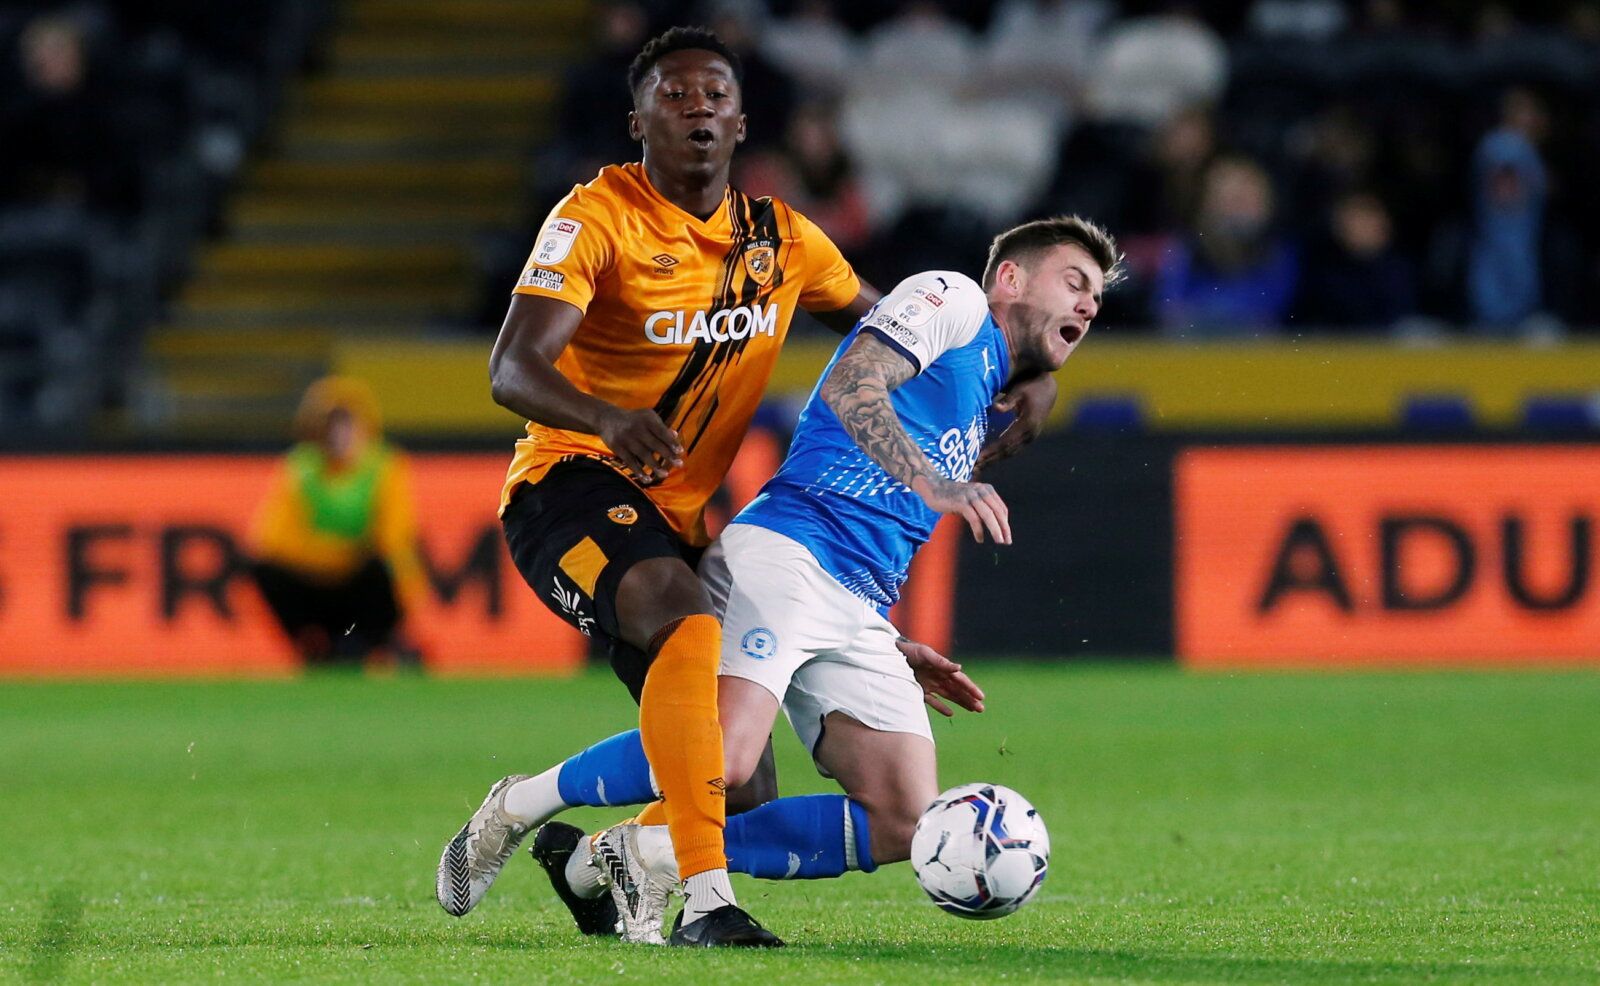 Soccer Football - Championship - Hull City v Peterborough United - KCOM Stadium, Hull, Britain - October 20, 2021  Hull City's Di'Shon Bernard (L) in action with Peterborough United's Sammie Szmodics  Action Images/Craig Brough  EDITORIAL USE ONLY. No use with unauthorized audio, video, data, fixture lists, club/league logos or 